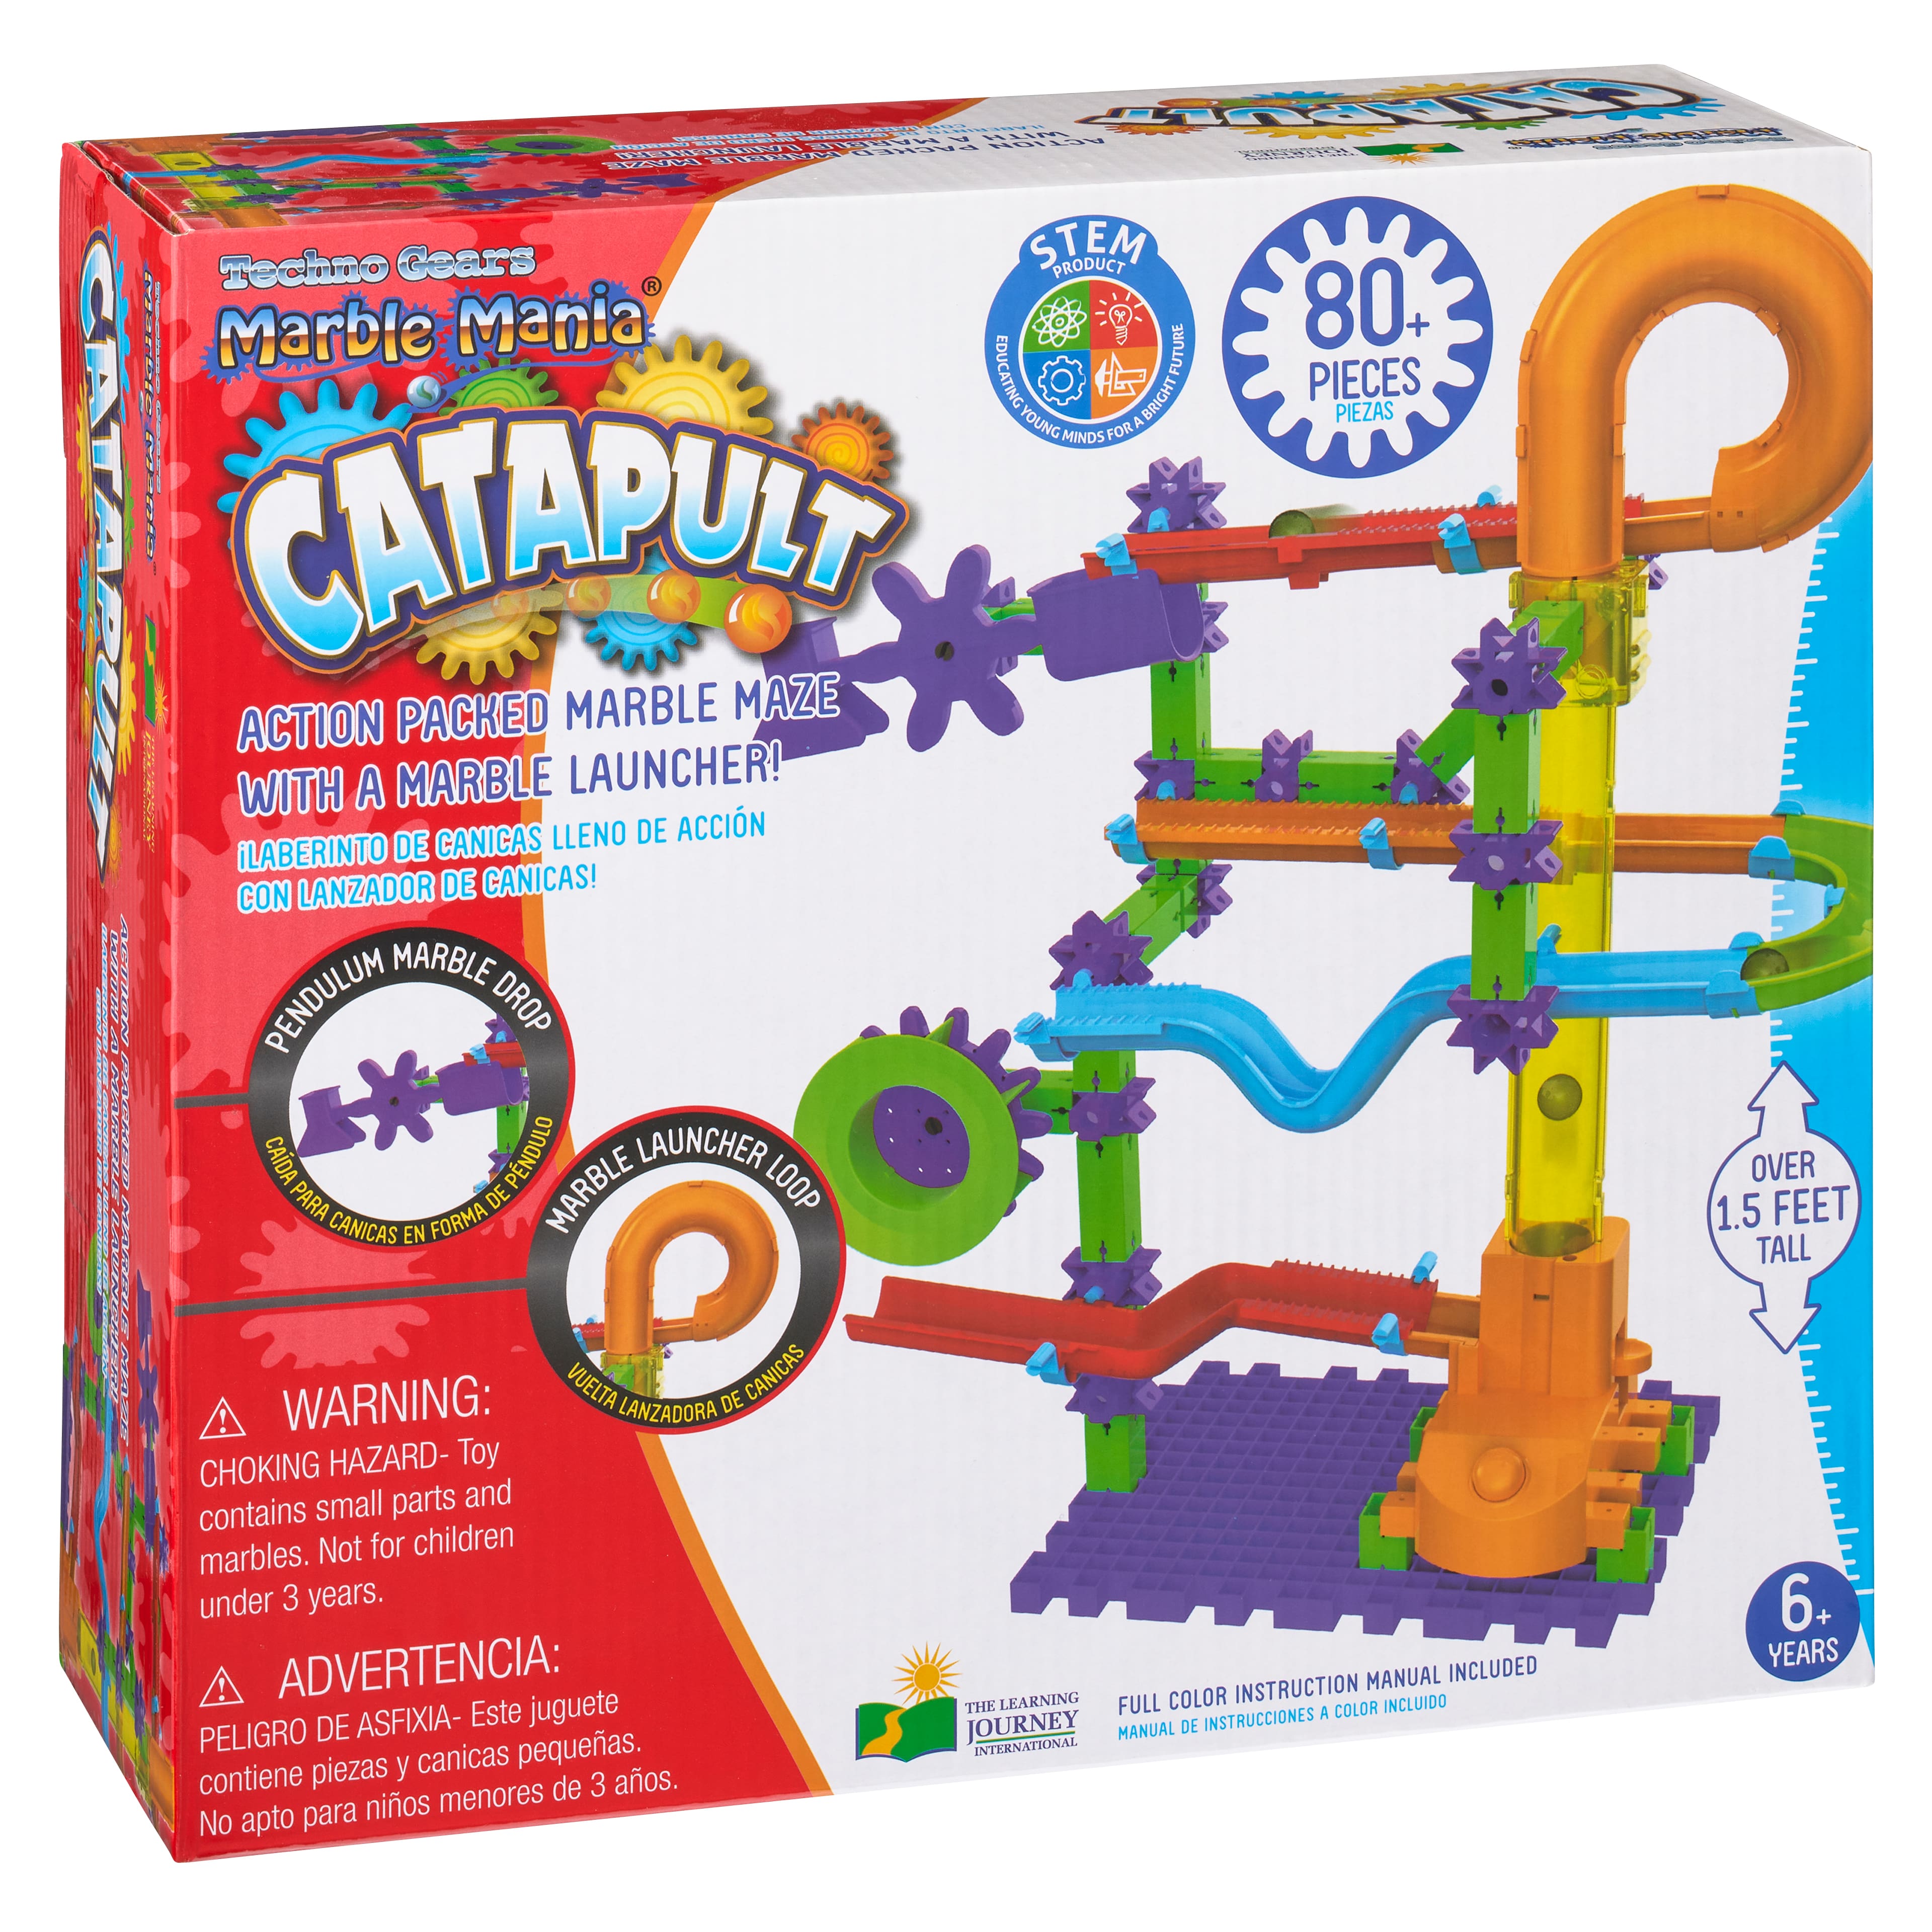 6 Pack: Marble Mania&#xAE; Catapult Marble Maze